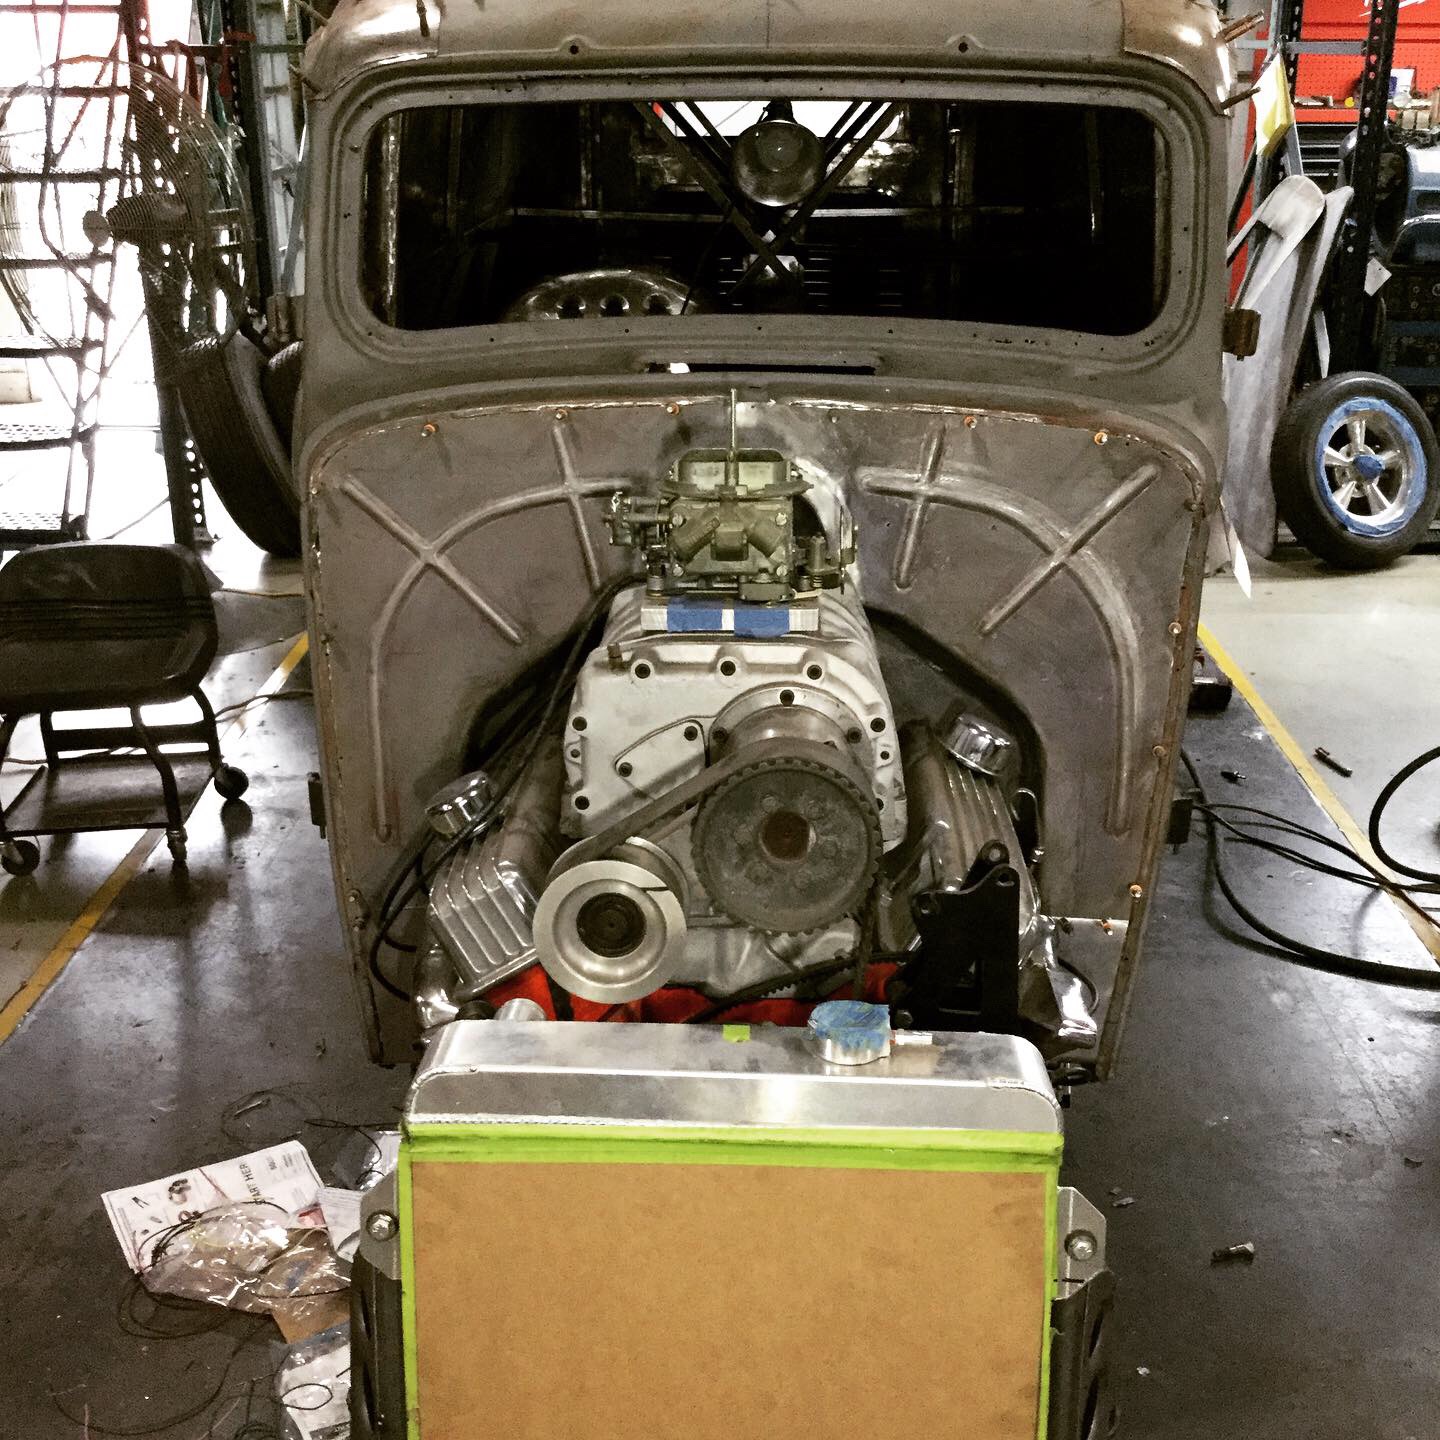 Mocking up the motor for the Willys Gasser